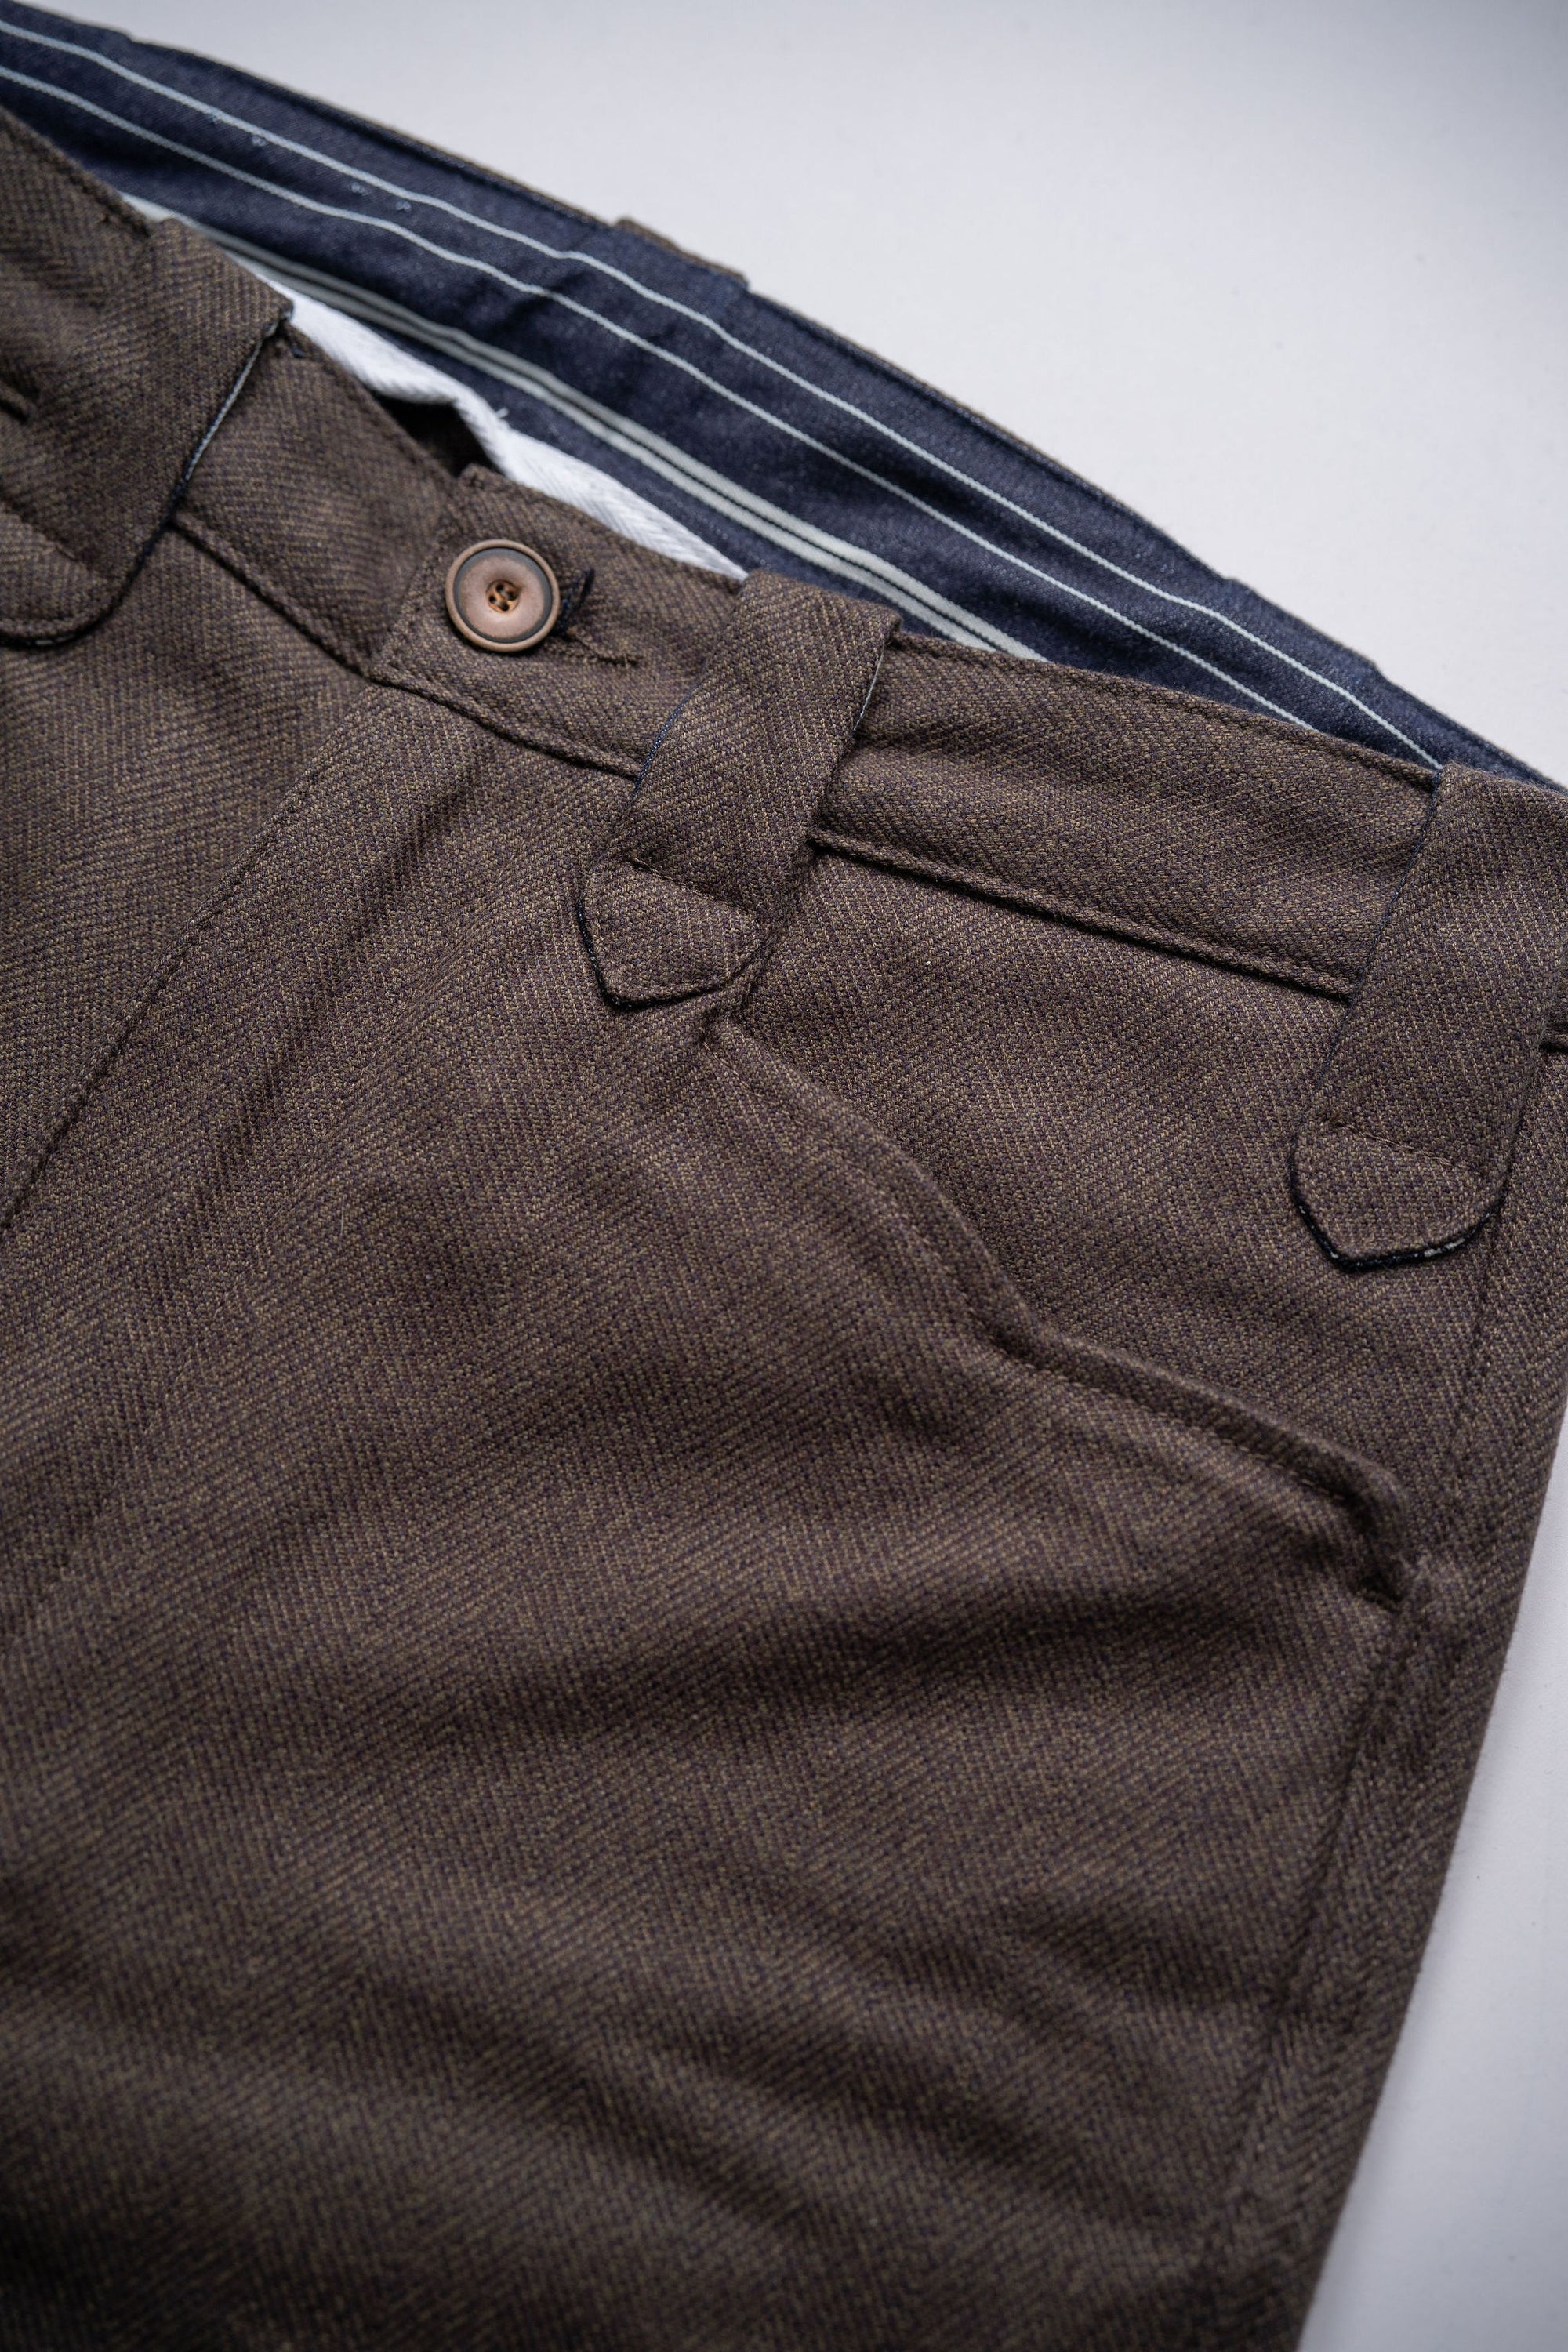 Freenote Cloth Duster Pant - Brown - Franklin & Poe